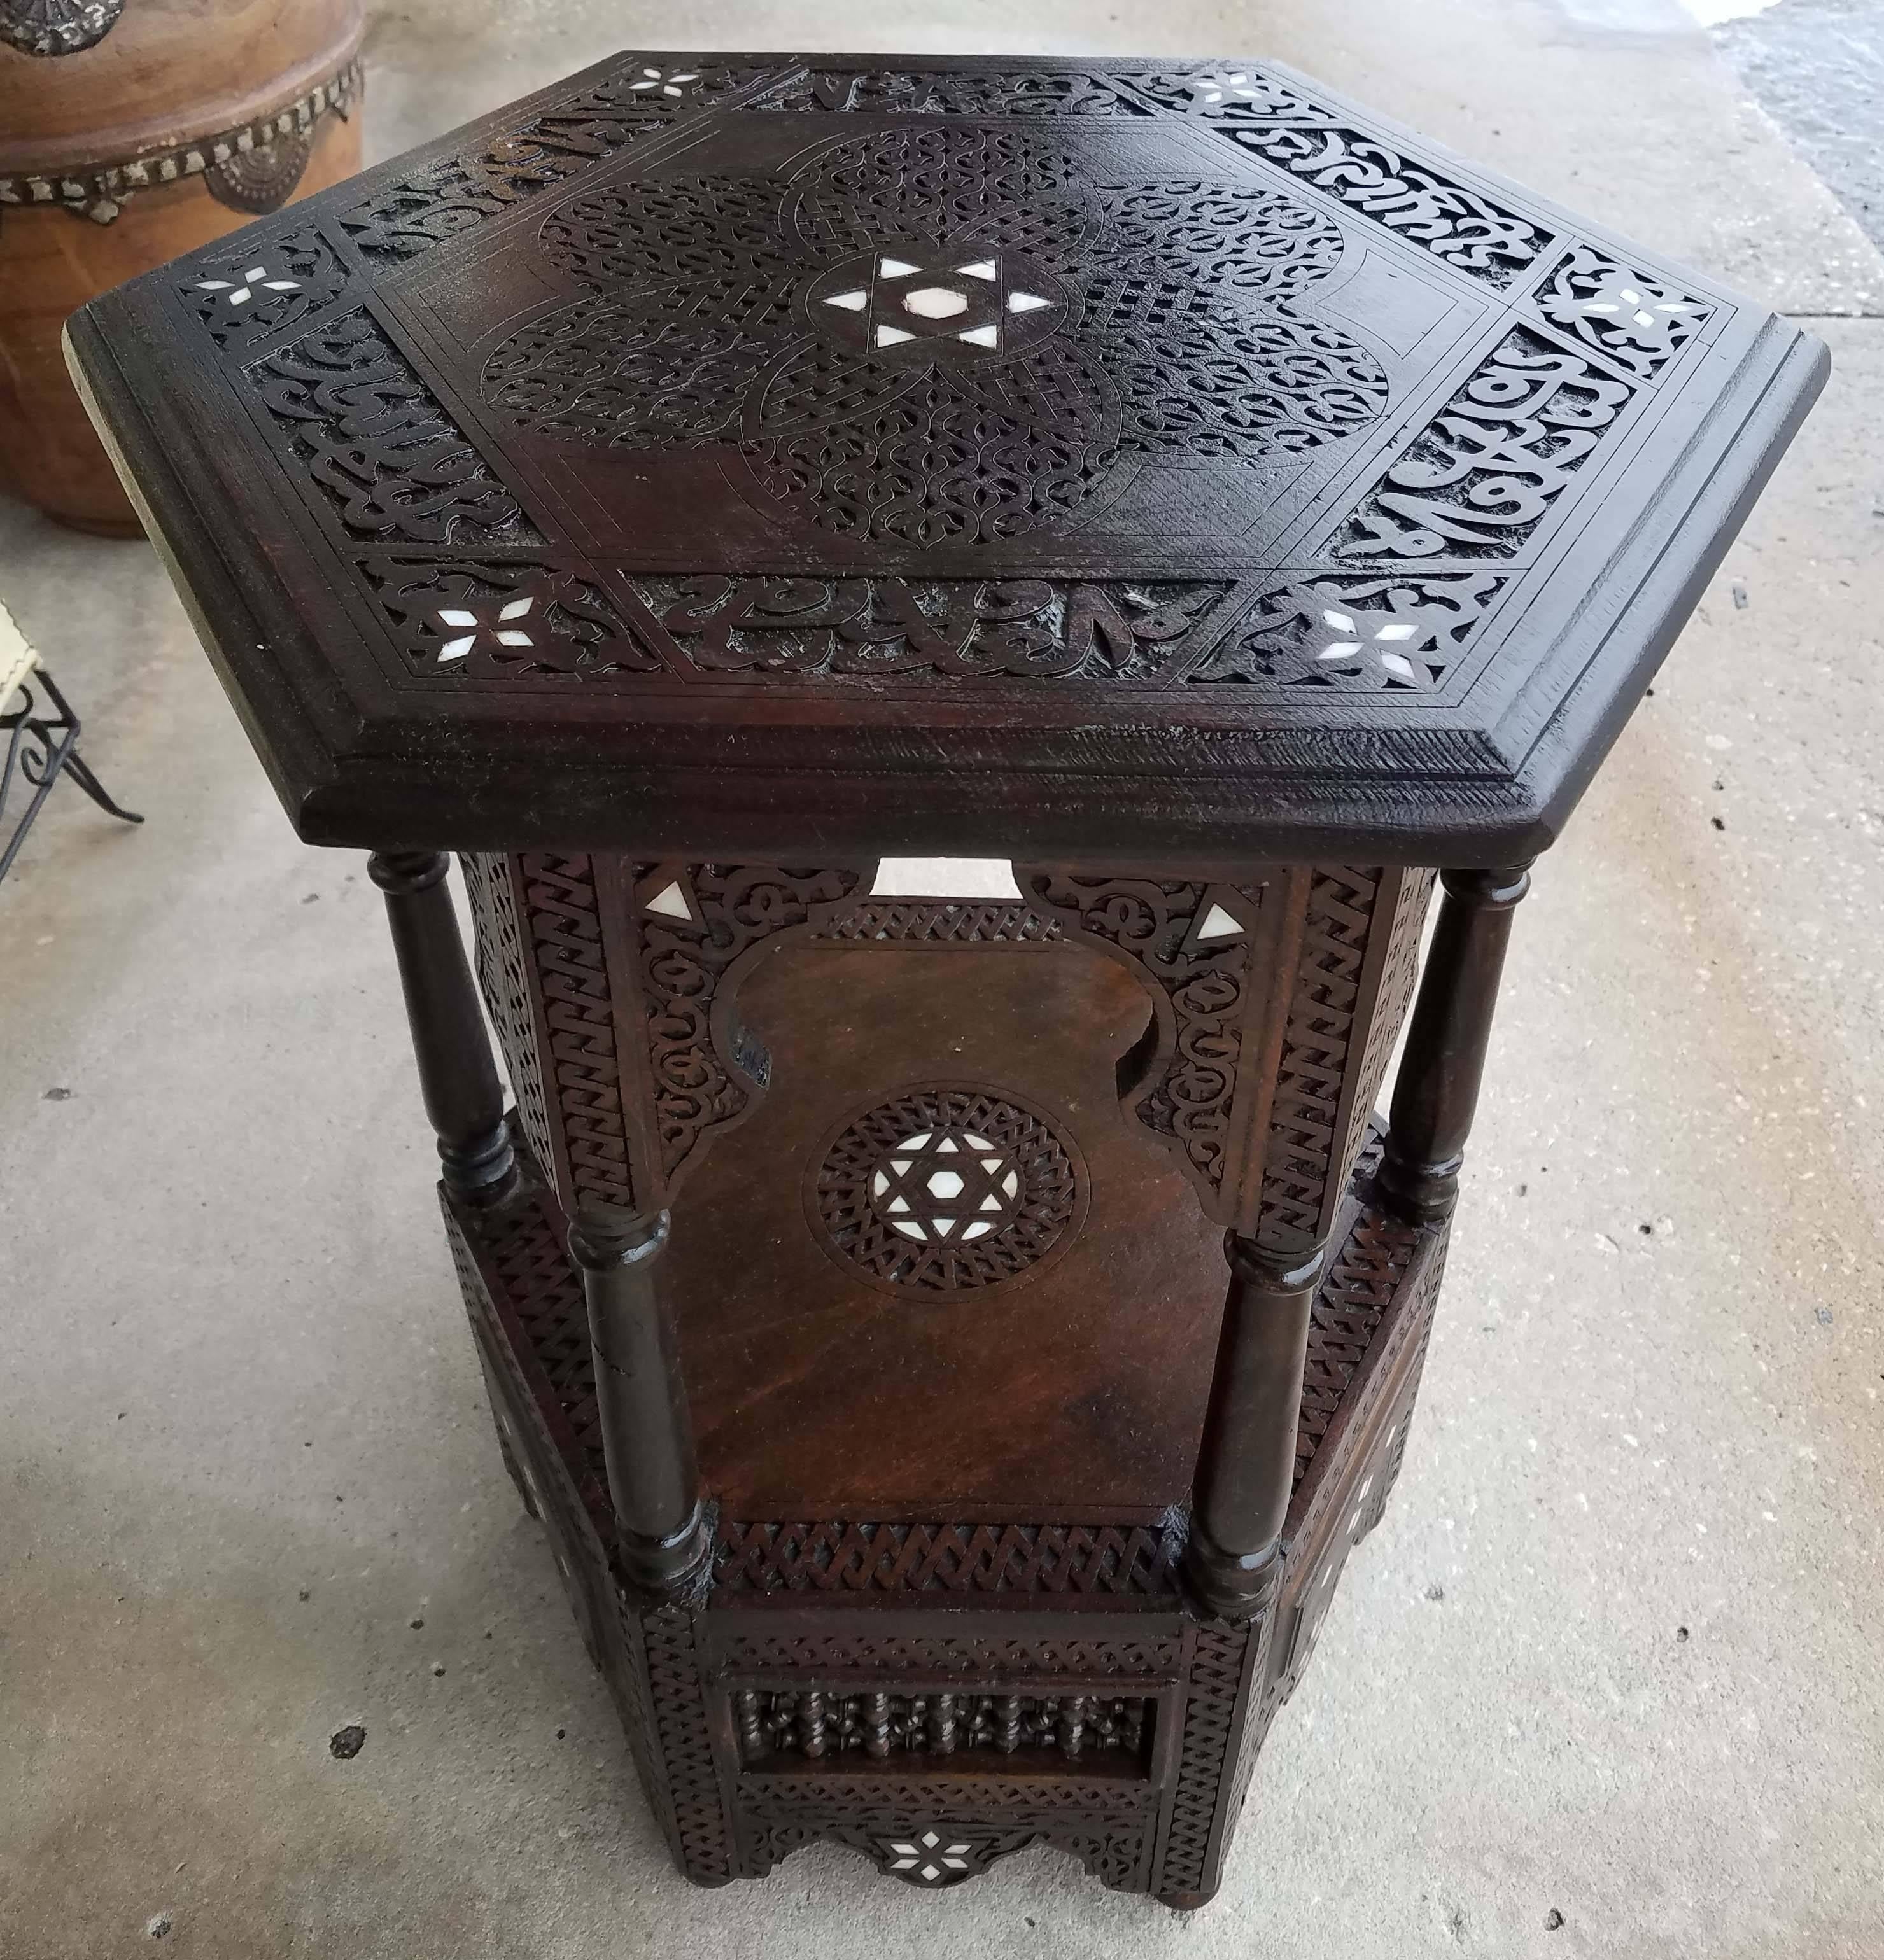 Gorgeous Syrian style mother-of-pearl side table made in Morocco. Made of walnut wood. Very intricate carvings throughout. Approximately 24